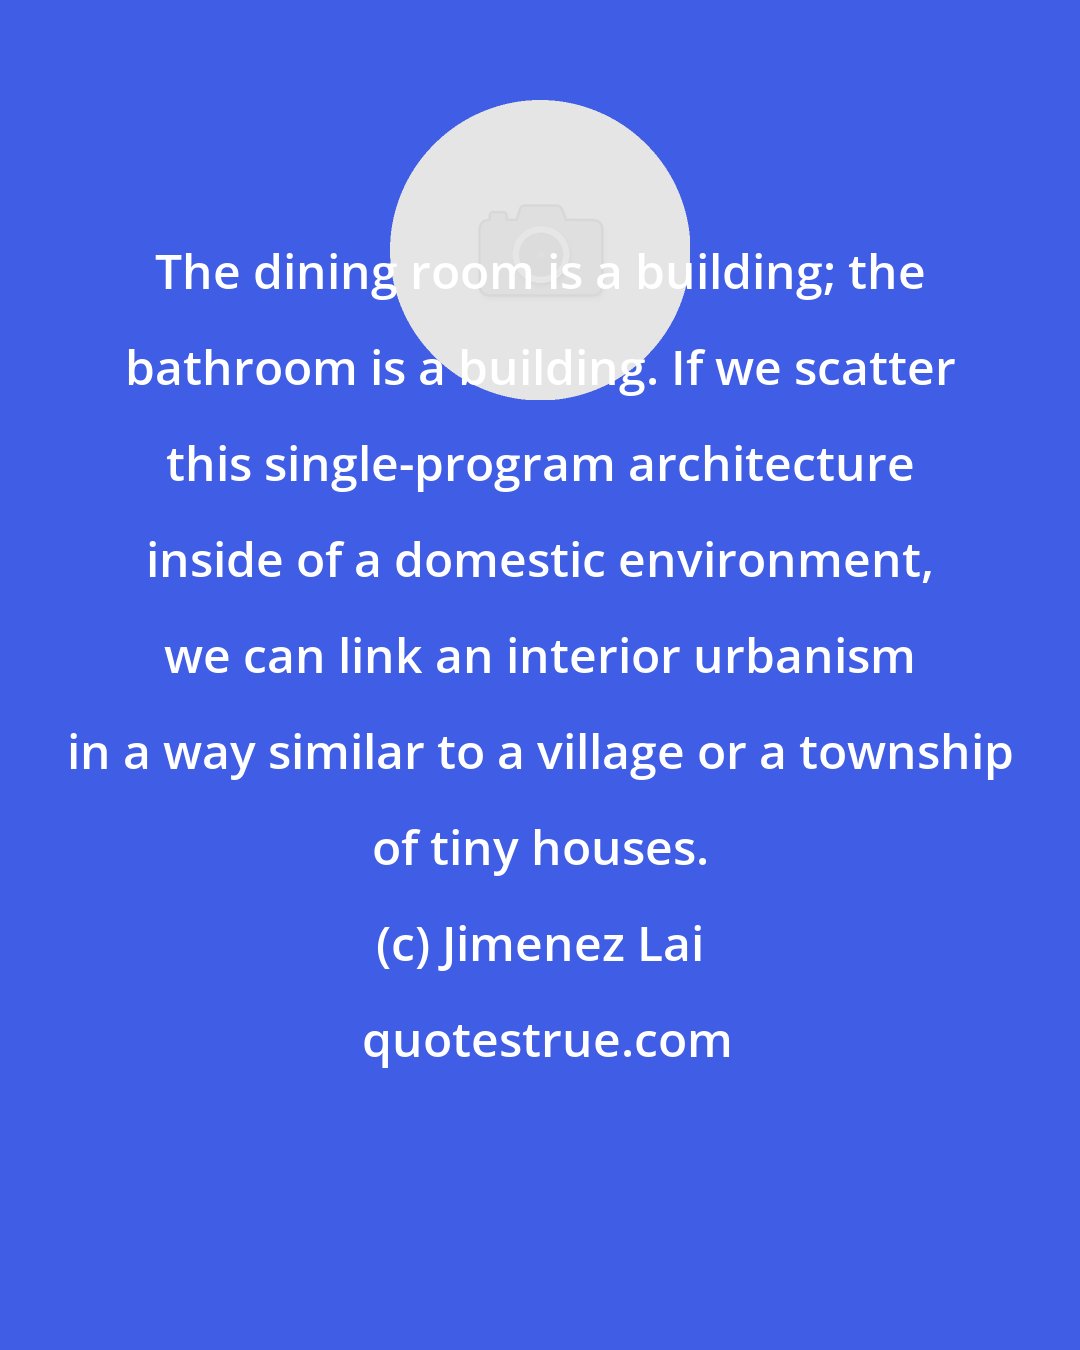 Jimenez Lai: The dining room is a building; the bathroom is a building. If we scatter this single-program architecture inside of a domestic environment, we can link an interior urbanism in a way similar to a village or a township of tiny houses.